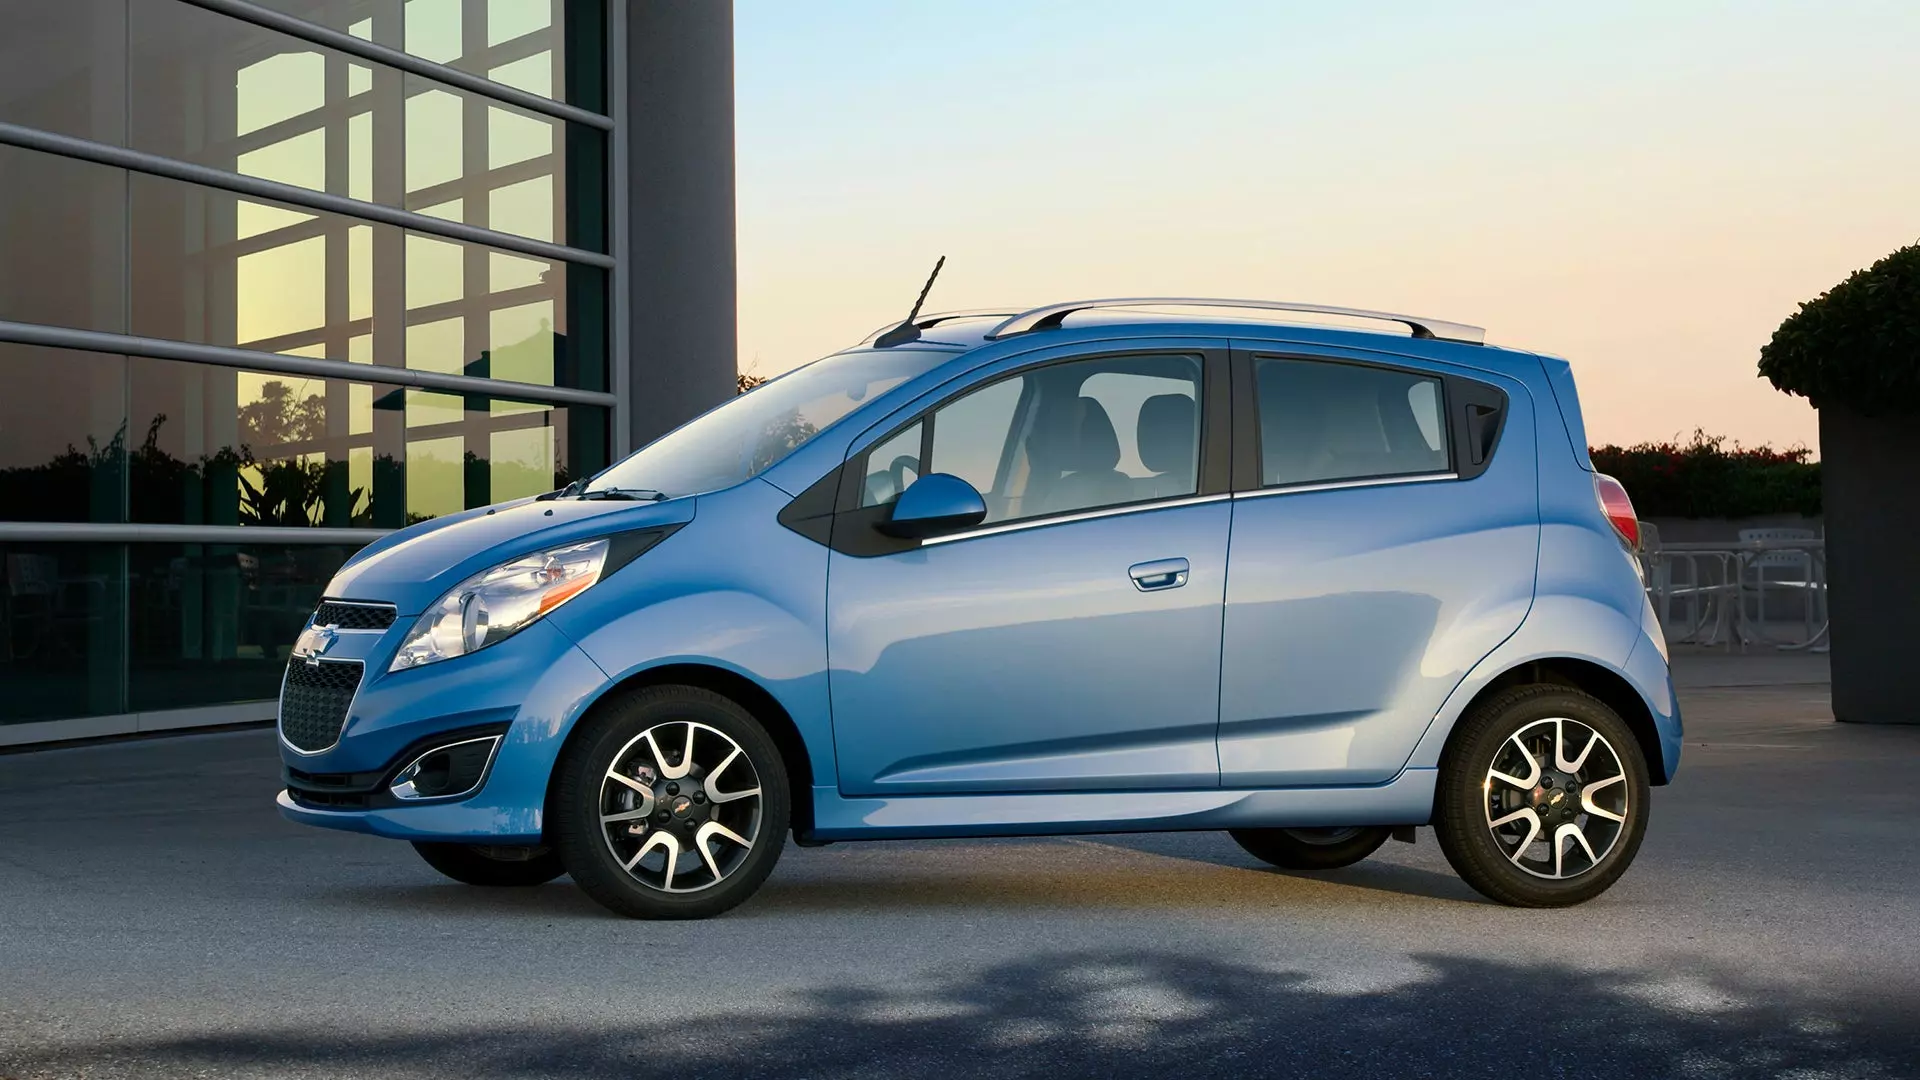 The Chevy Spark Should Be Remembered For Its Excellent Colors | Autance